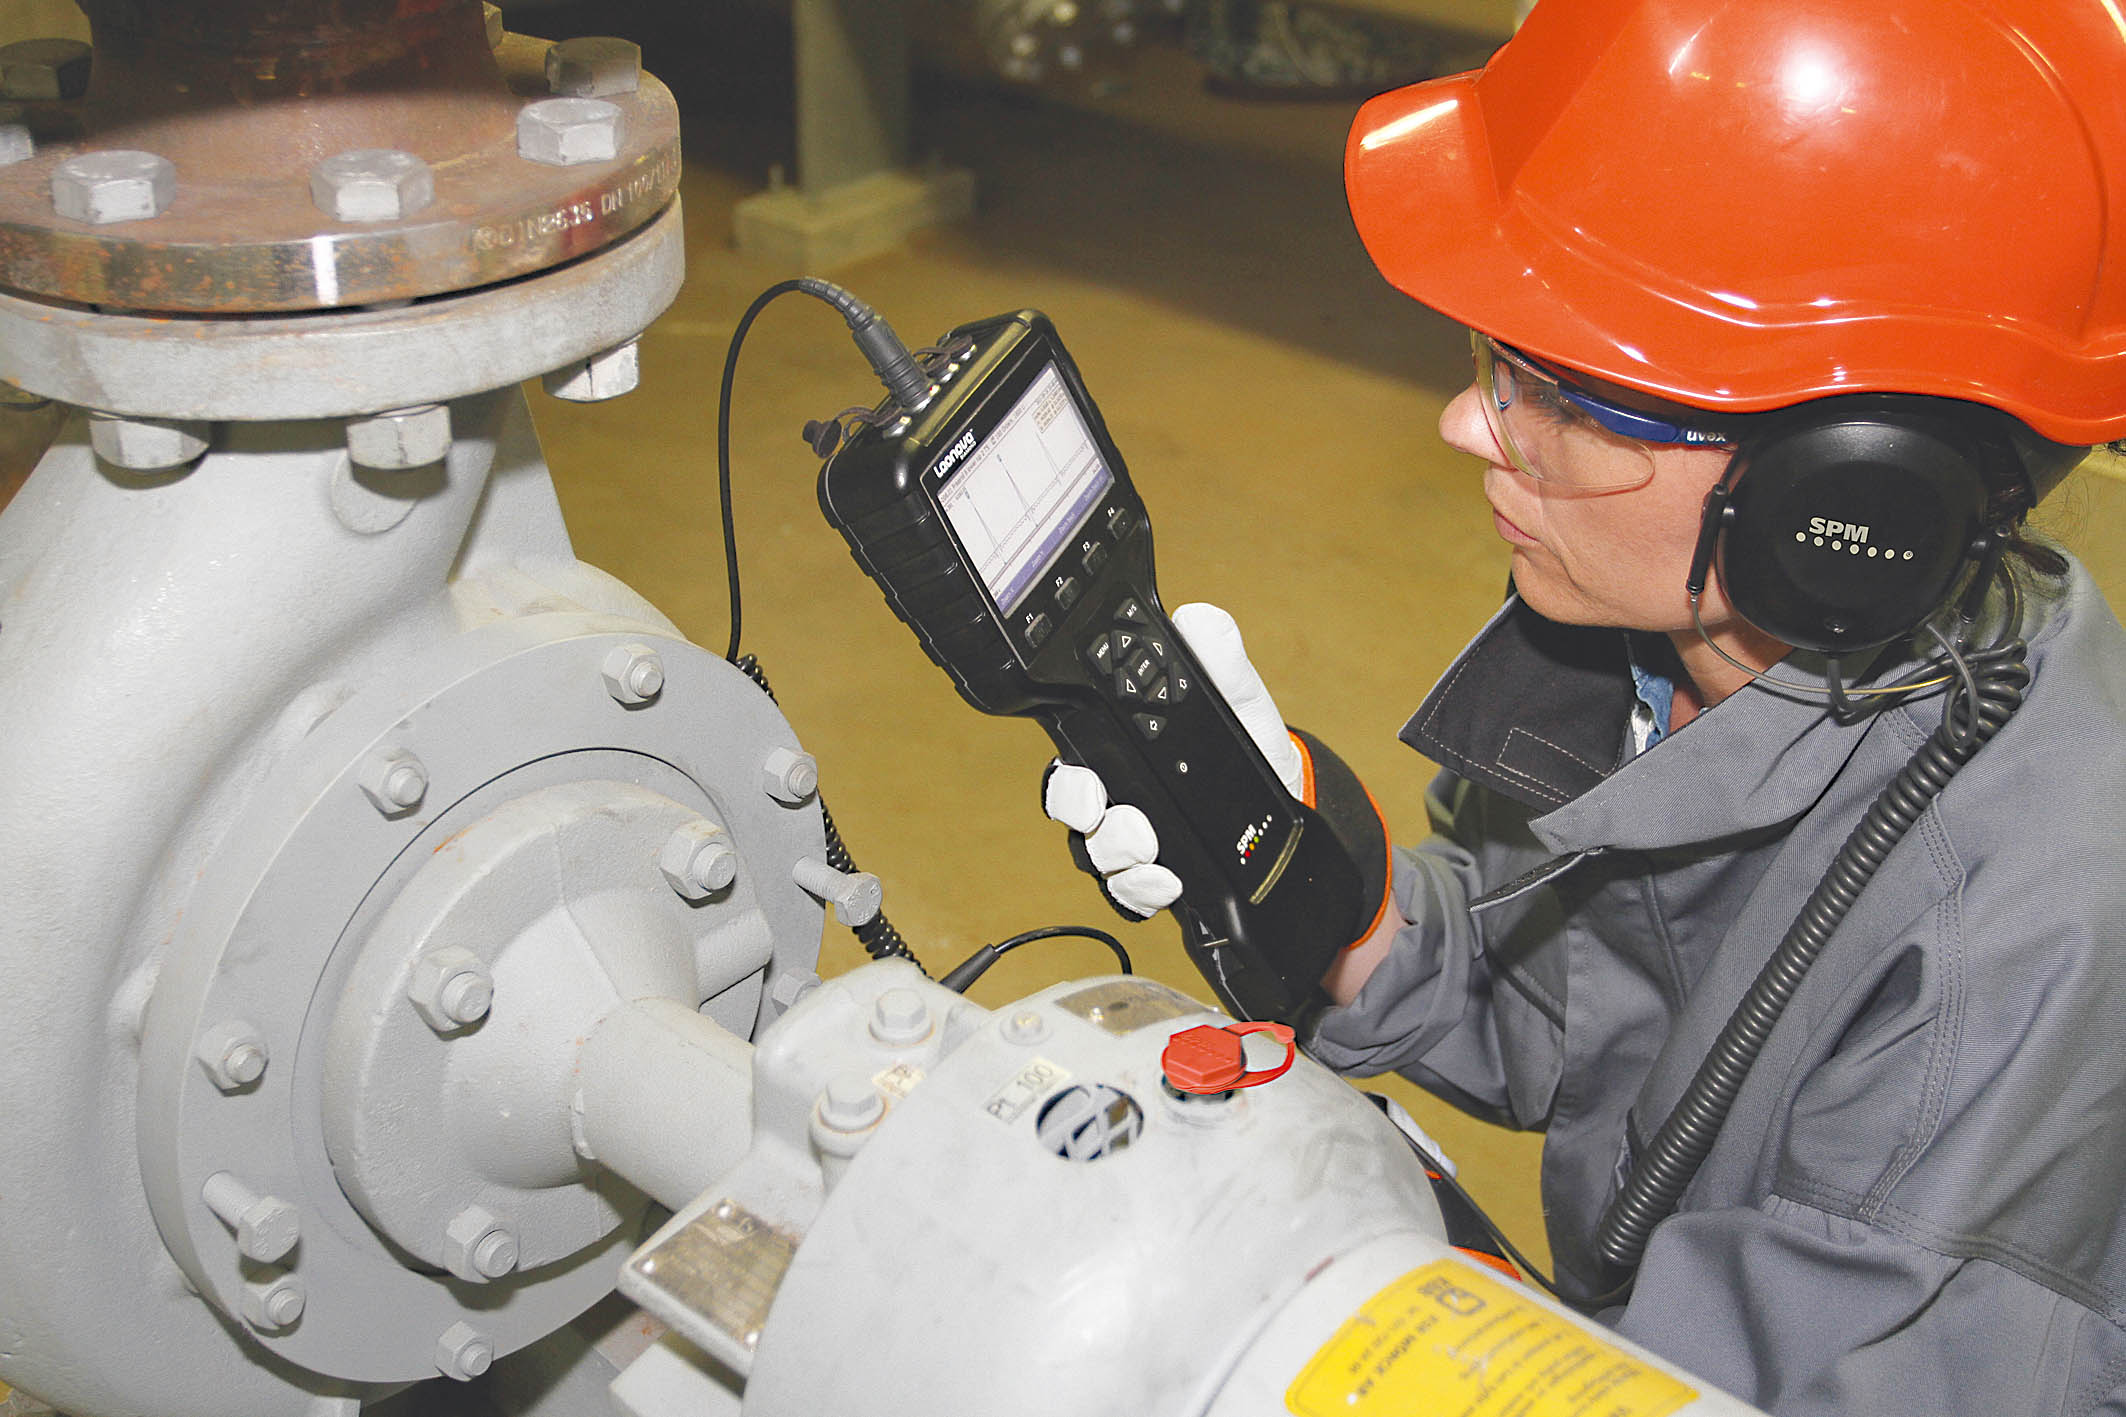 Which vibration meter or analyzer to choose?